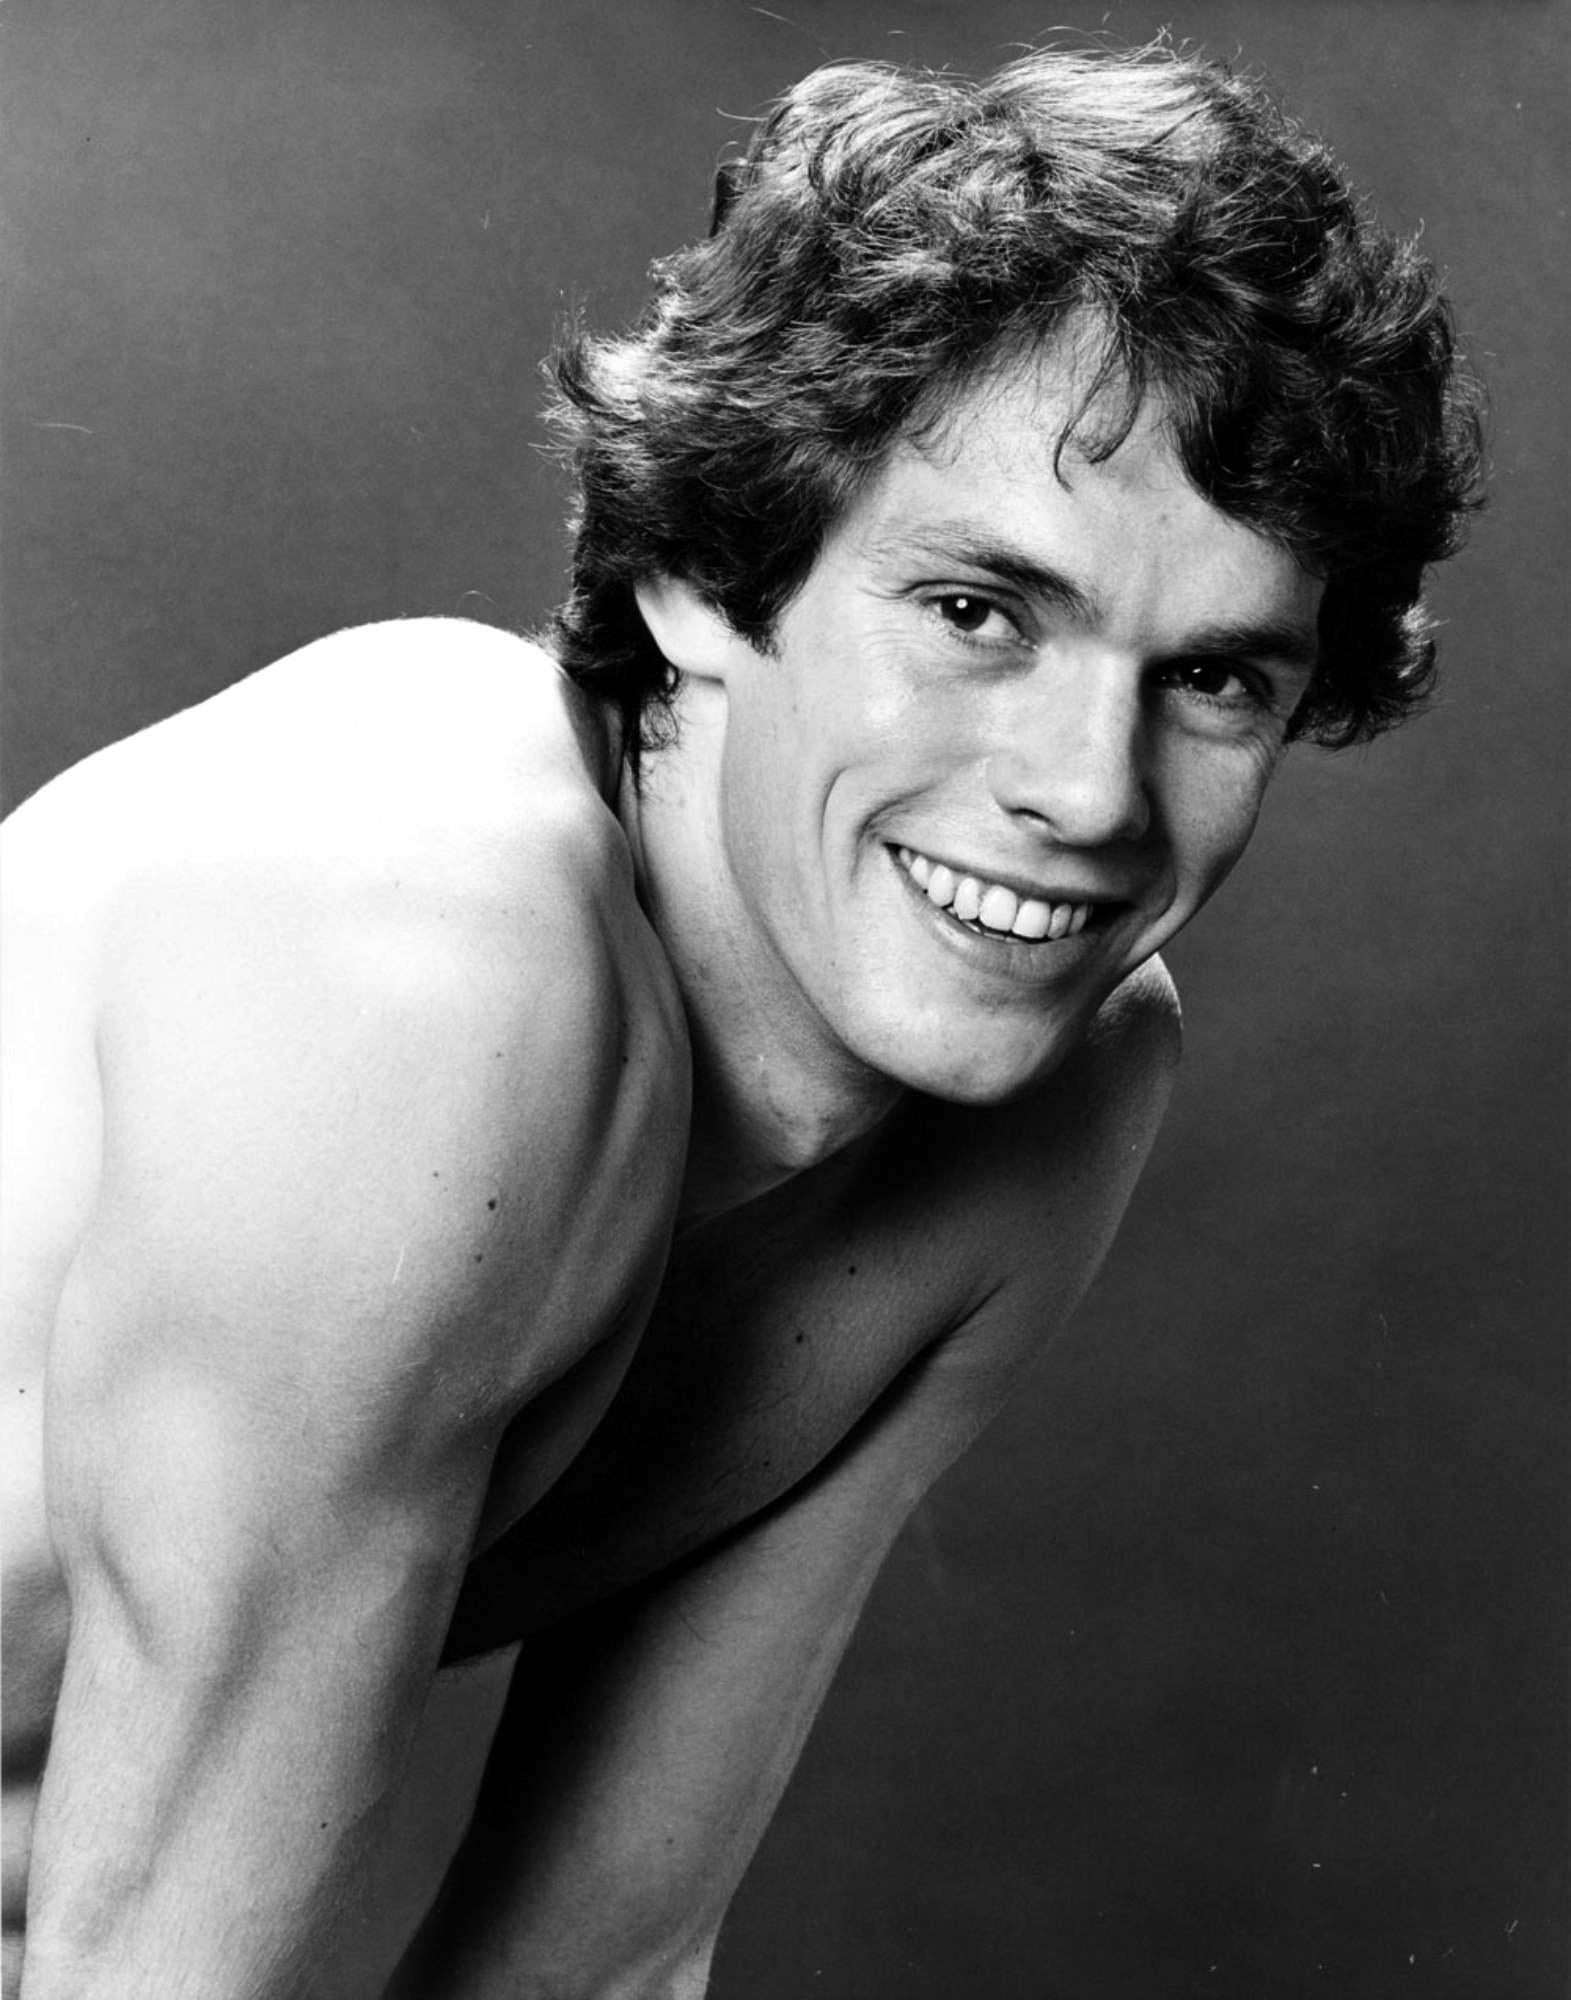 Jack Mitchell Nude Photograph - Olympic Gold Medal winning British figure skater John Curry, signed by Mitchell